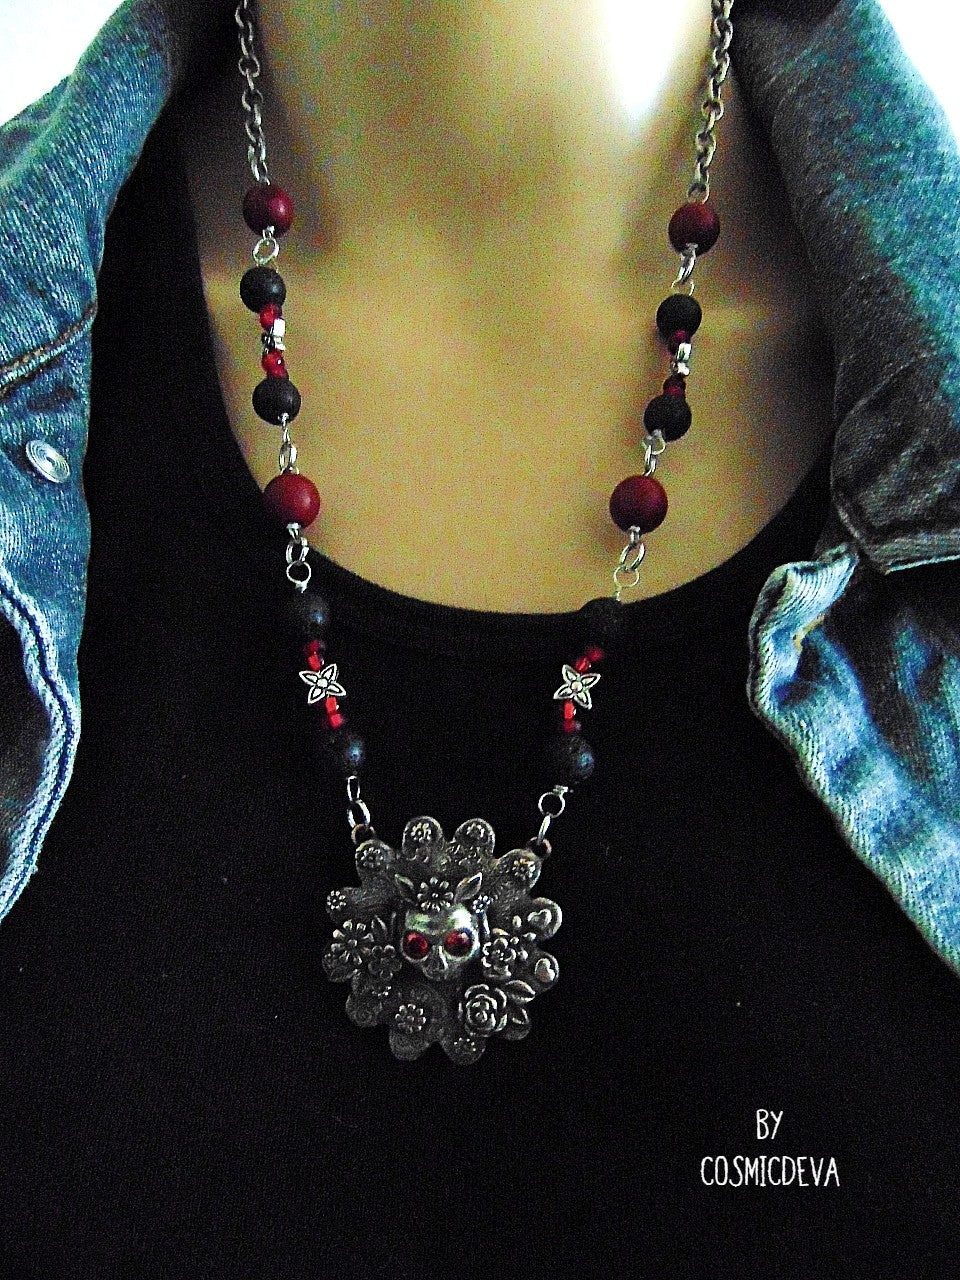 Unique detailed silver bronze Frida Kahlo sugar skull pendant necklace influenced by Mexican culture and symbolism. The flower shaped 3d pendant is featuring a sugar skull decorated with the typical Frida Kahlo signature floral wreath and faceted red garnet cubic zirconia gemstones as eyes. Incorporated flowers, roses, leaves and tiny hearts surrounding the skull. On the backside of the pendant is the CosmicDeva Hallmark